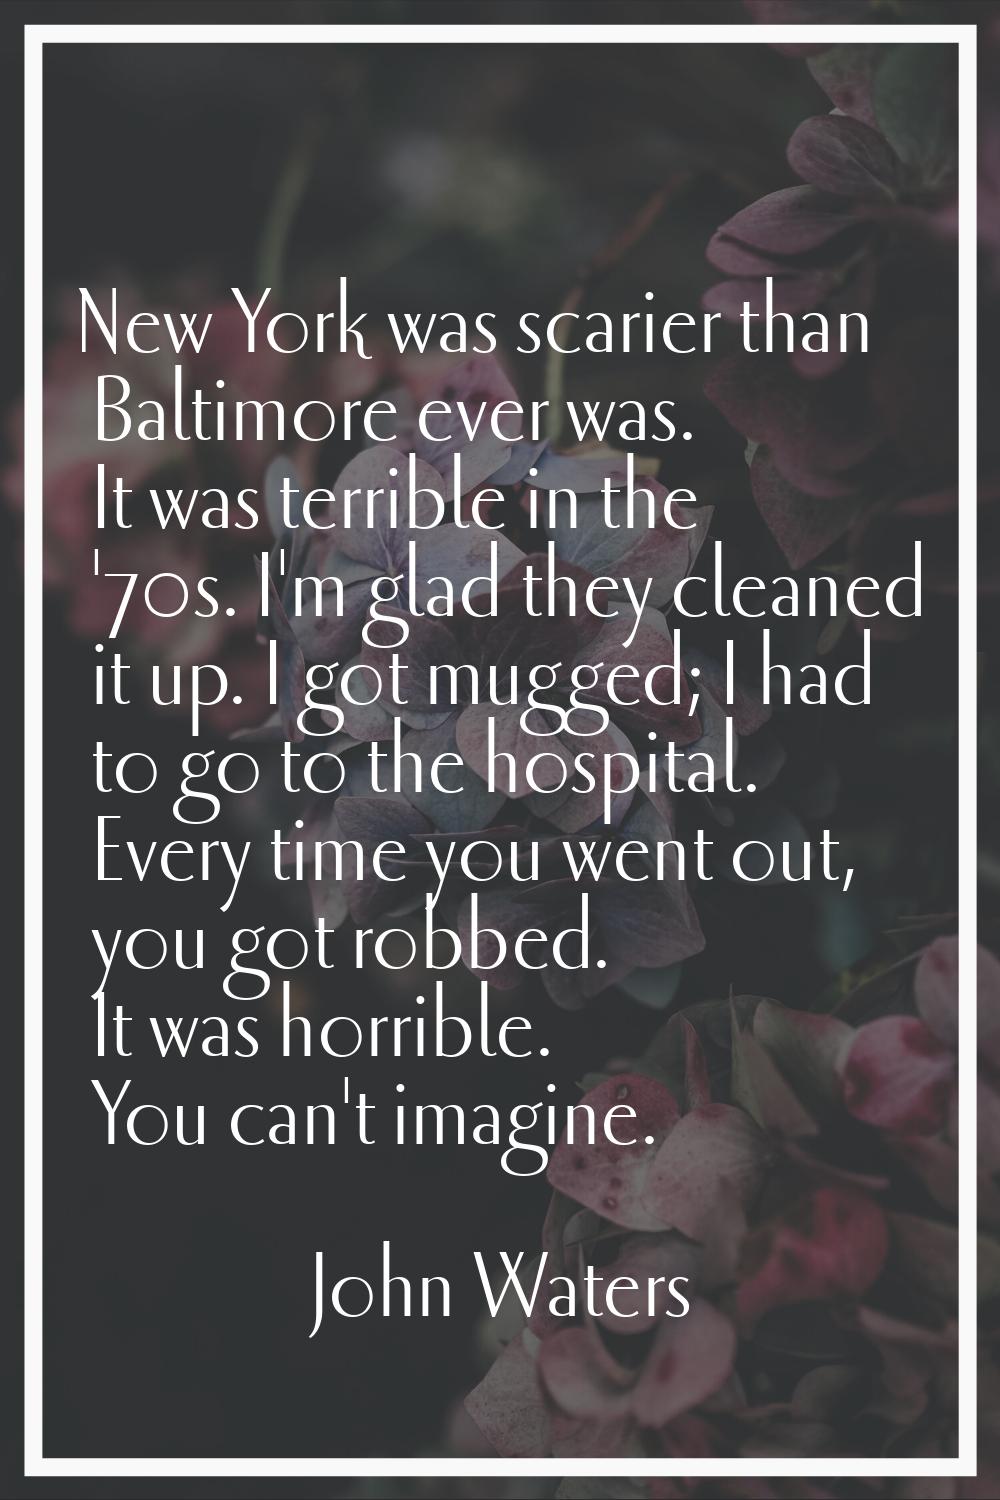 New York was scarier than Baltimore ever was. It was terrible in the '70s. I'm glad they cleaned it